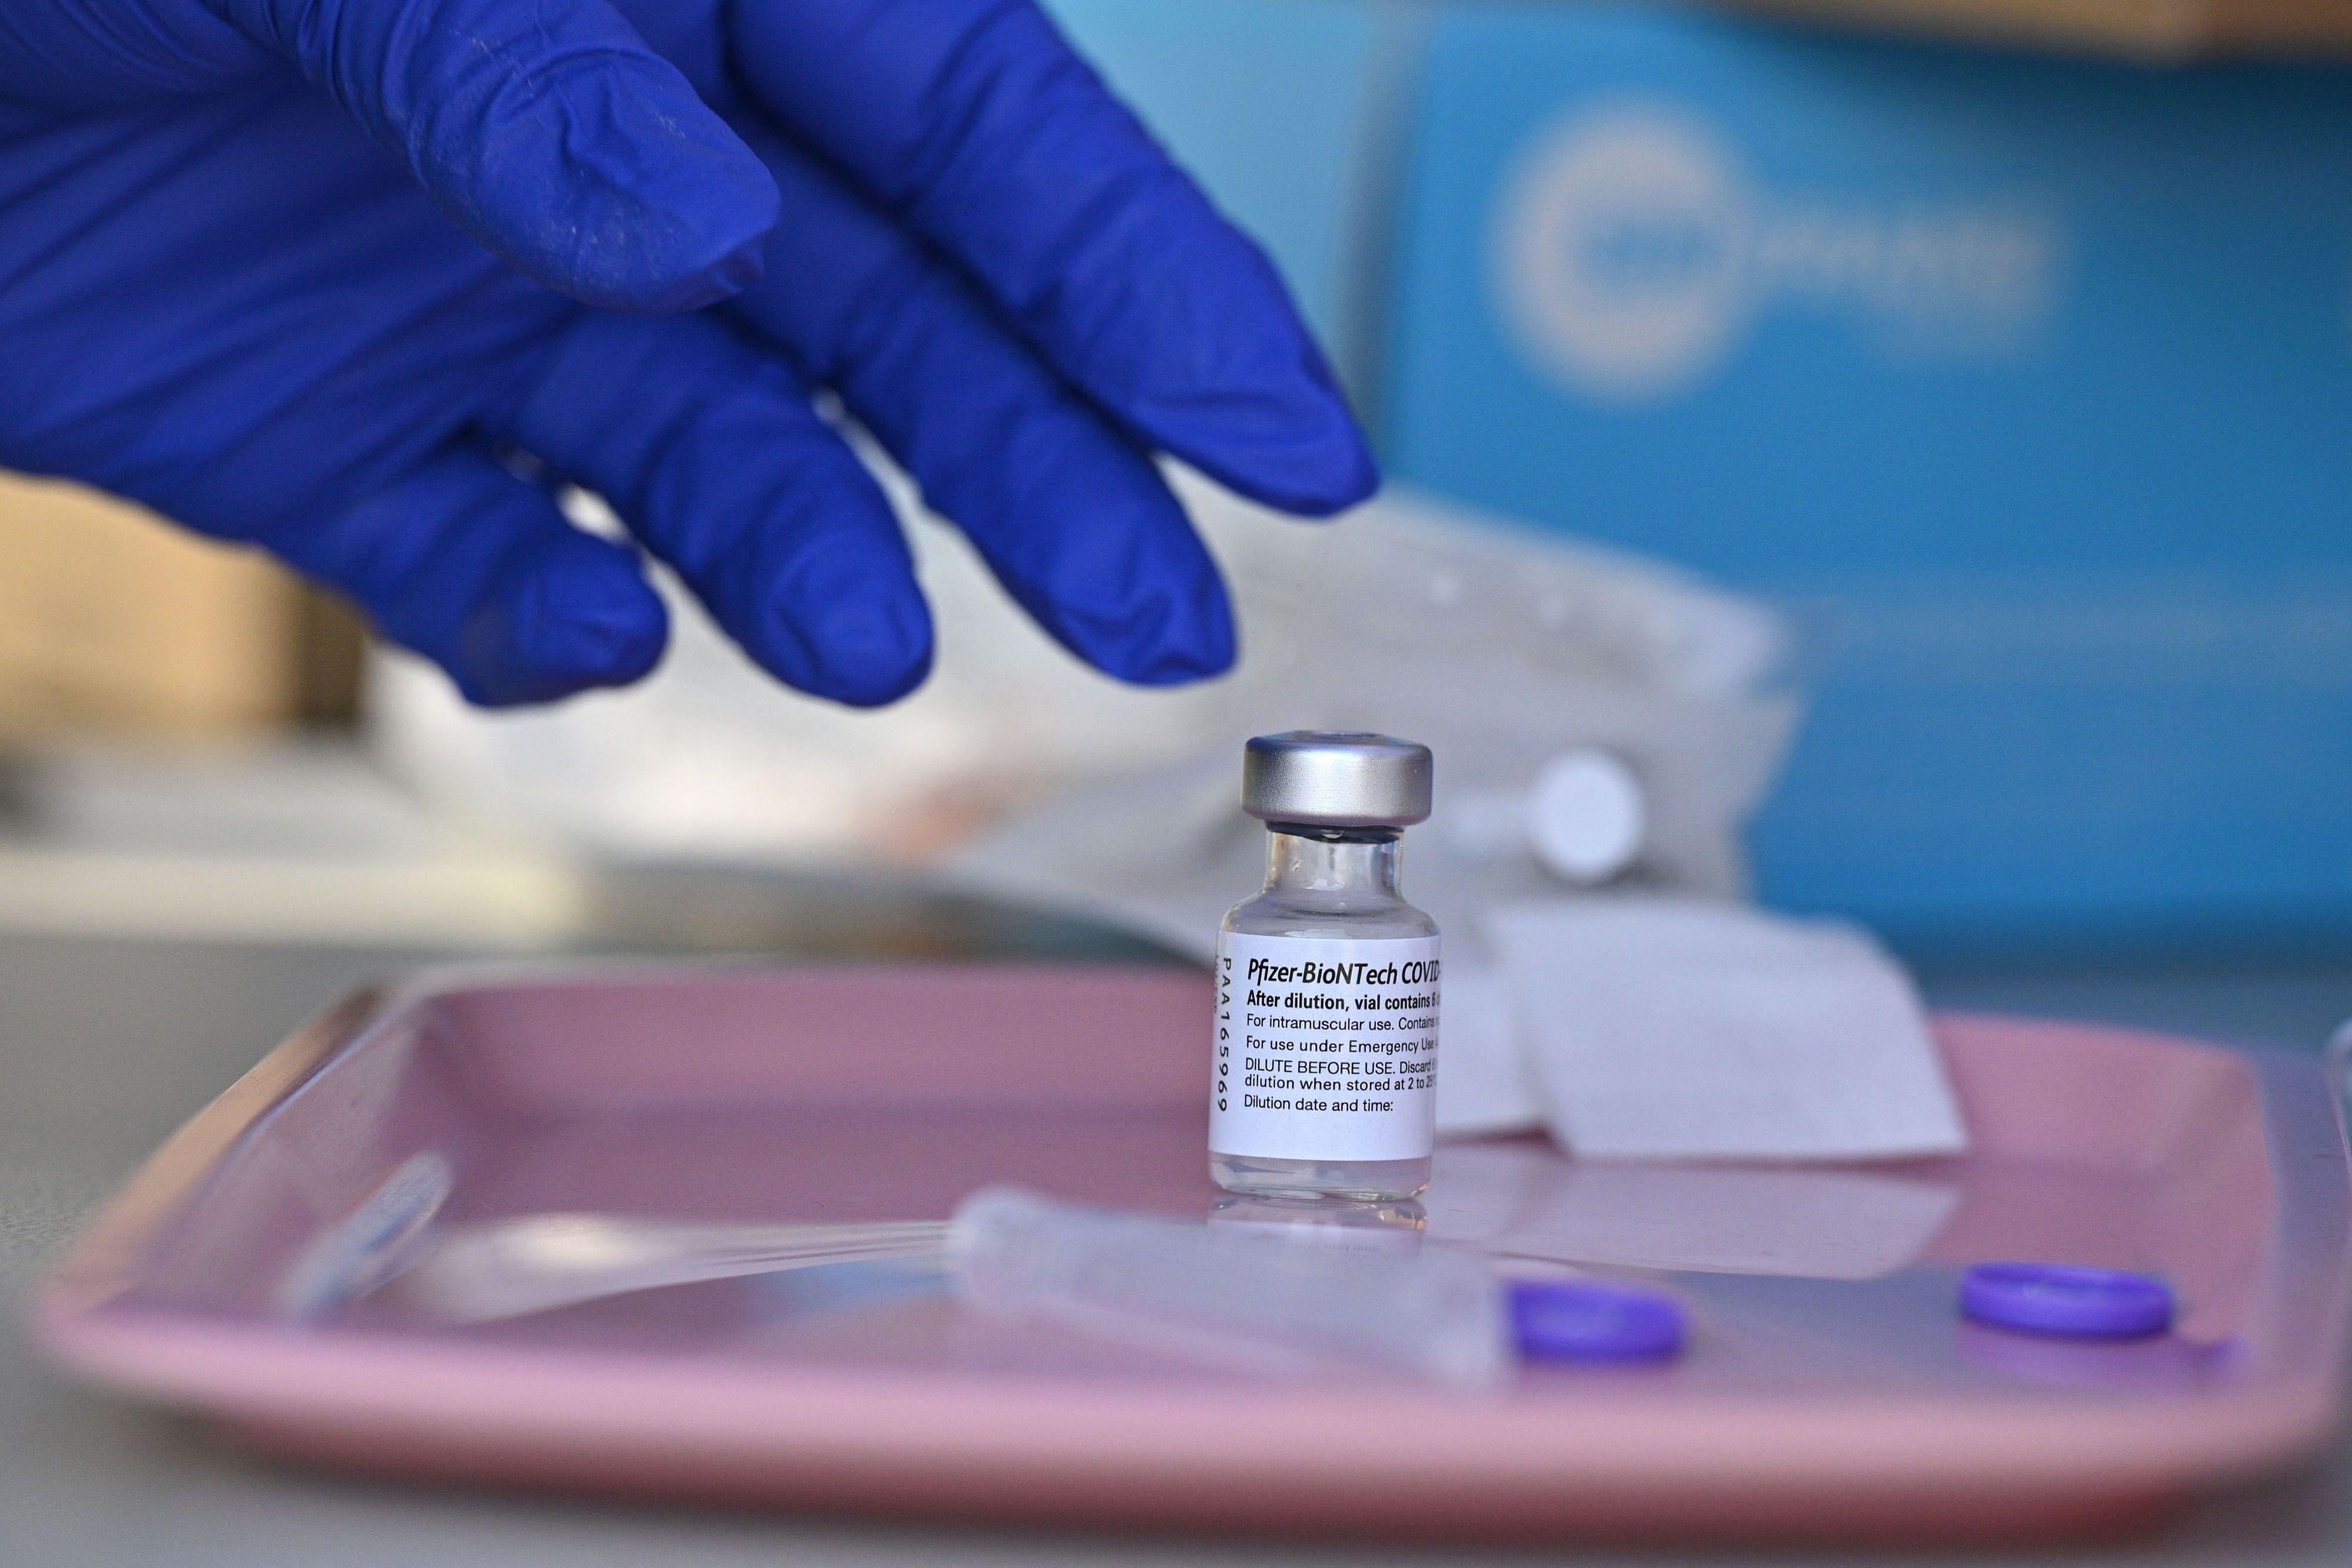 A nurse reaches for a vial of Pfizer-BioNTech Covid-19 vaccine at a pop up vaccine clinic in the Arleta neighborhood of Los Angeles, California, August 23, 2021. Around 52 percent of the American population is fully vaccinated, but health authorities have hit a wall of vaccine hesitant people, impeding the national campaign. (Photo by Robyn Beck / AFP) (Photo by ROBYN BECK/AFP via Getty Images)